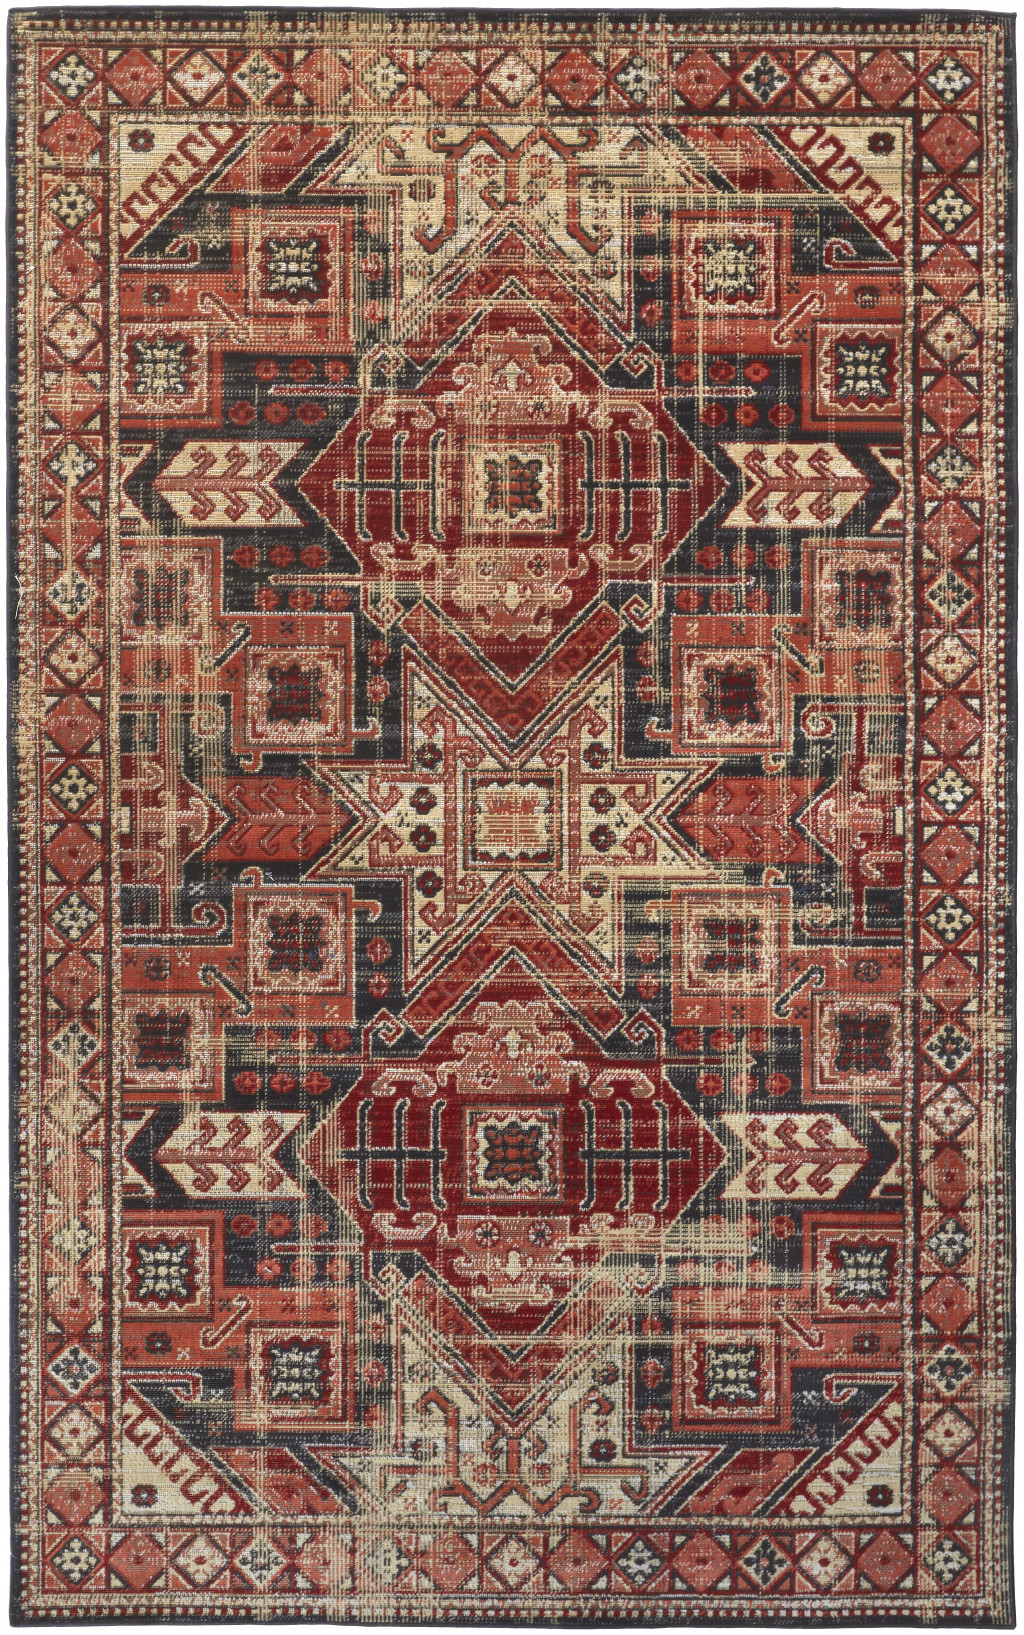 10' X 13' Red Tan And Black Abstract Power Loom Distressed Stain Resistant Area Rug-514636-1